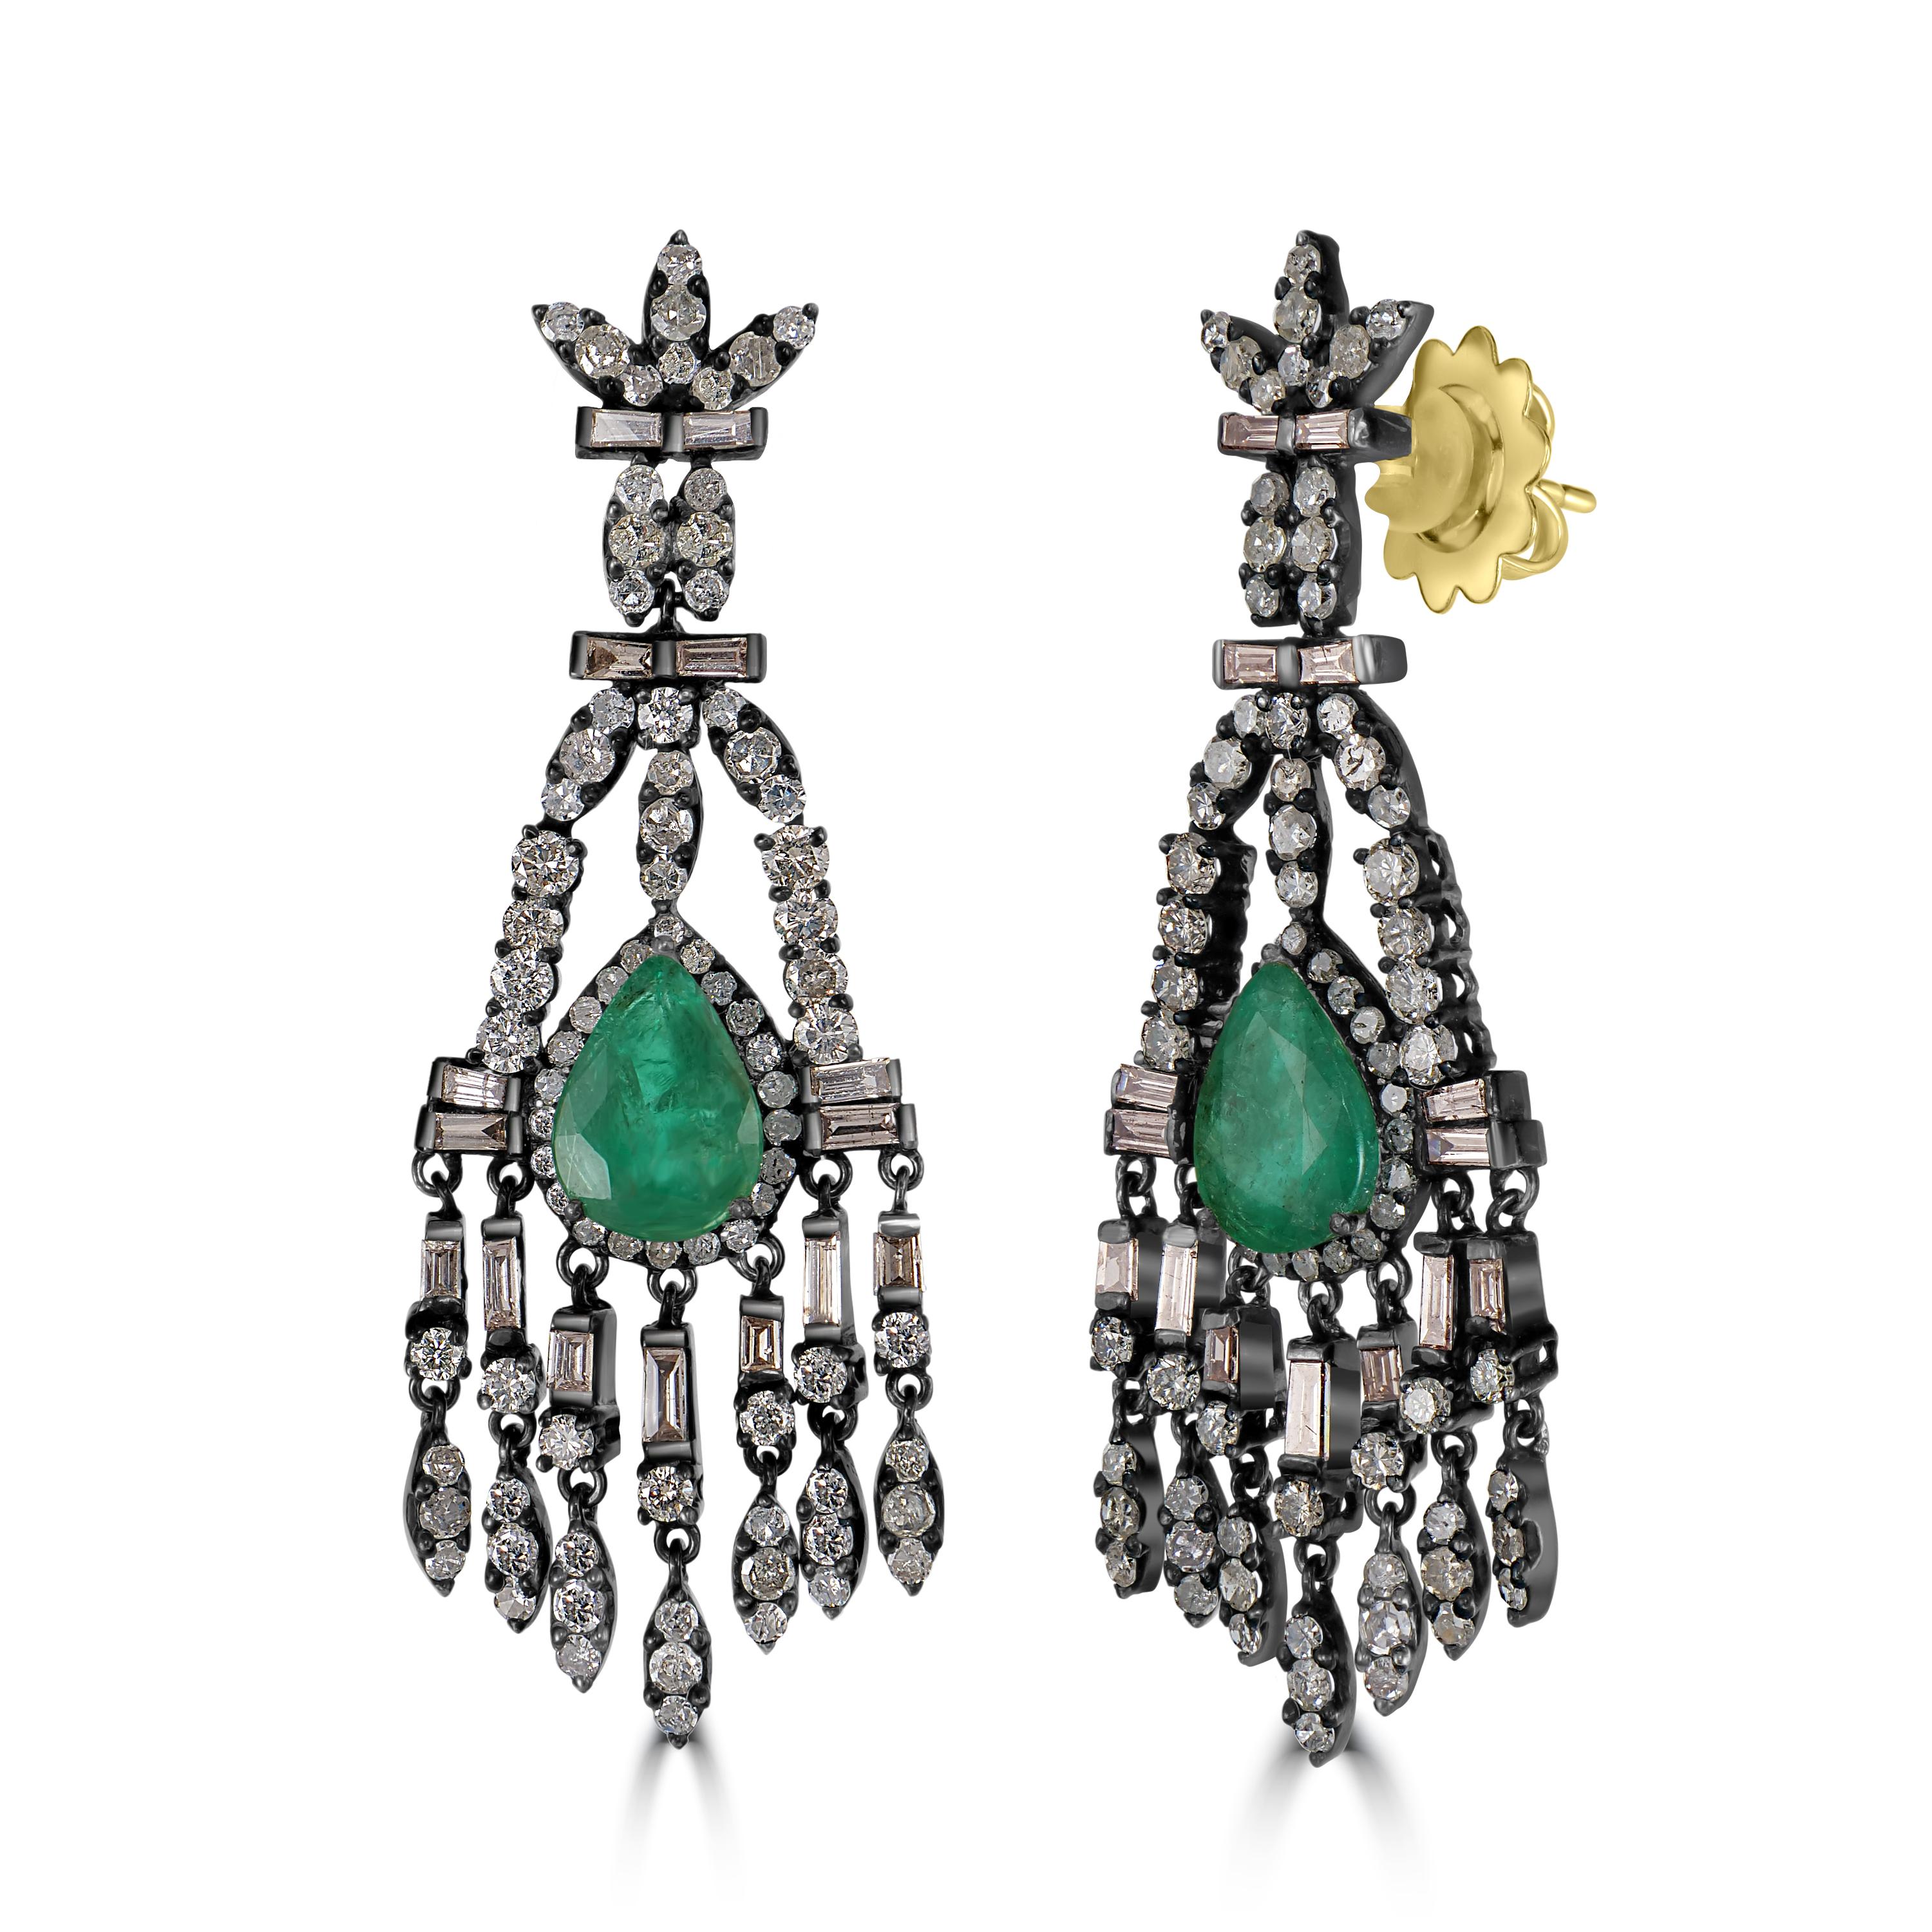 Indulge in the exquisite beauty of our Victorian Emerald and Diamond Floral Chandelier Earrings, a stunning testament to timeless elegance and sophistication.

These captivating chandelier earrings feature a meticulously crafted three-leaf black